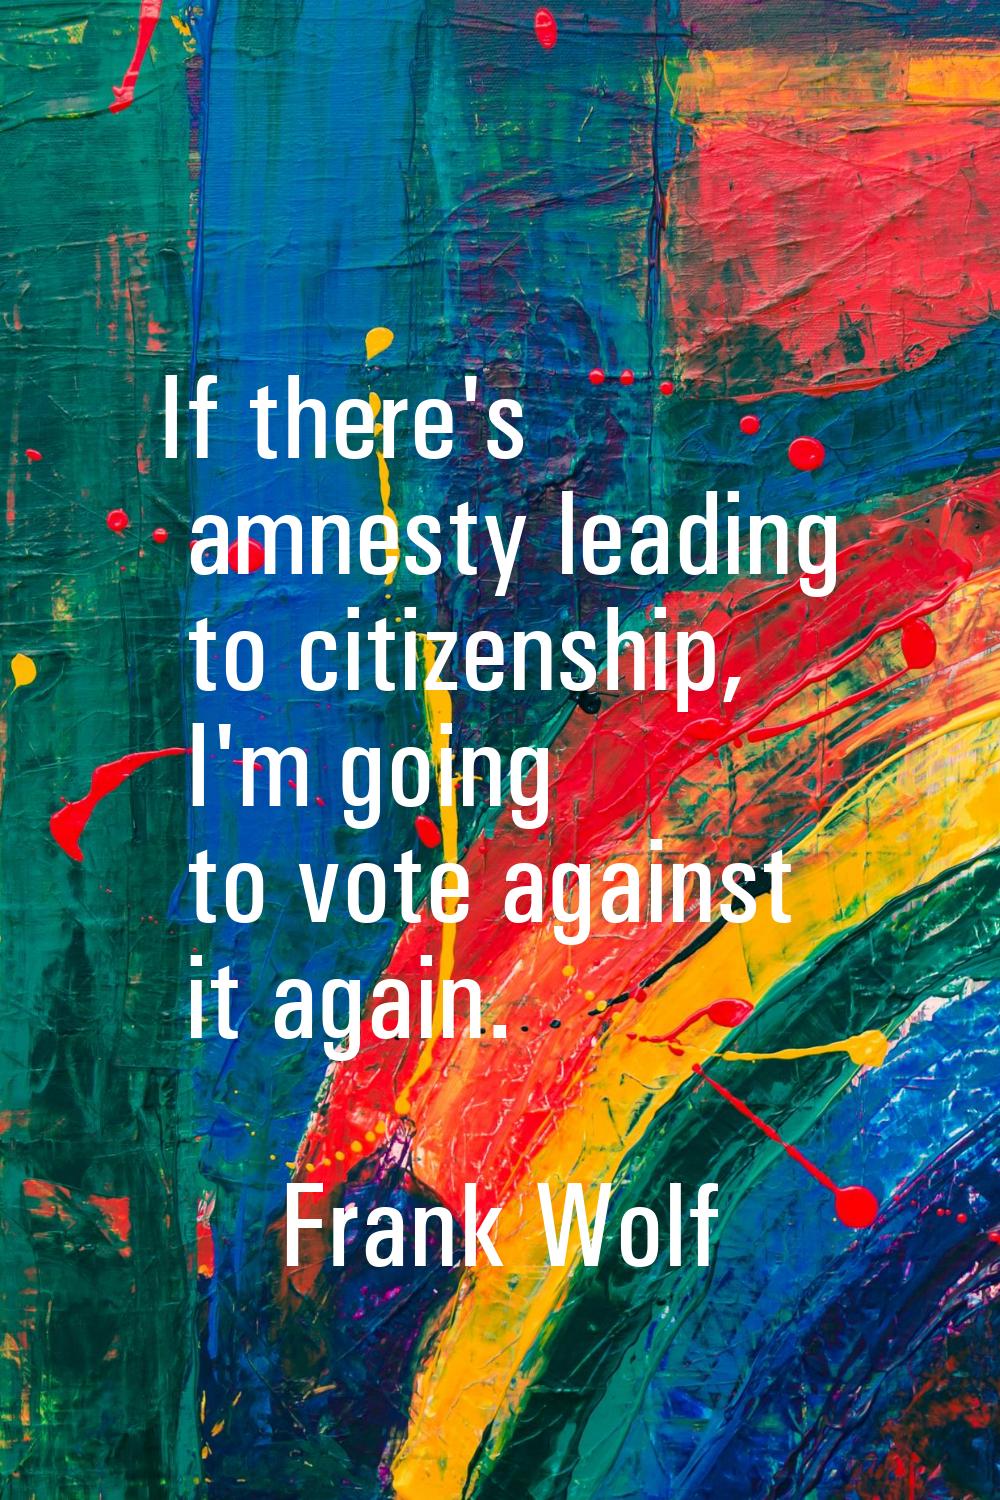 If there's amnesty leading to citizenship, I'm going to vote against it again.